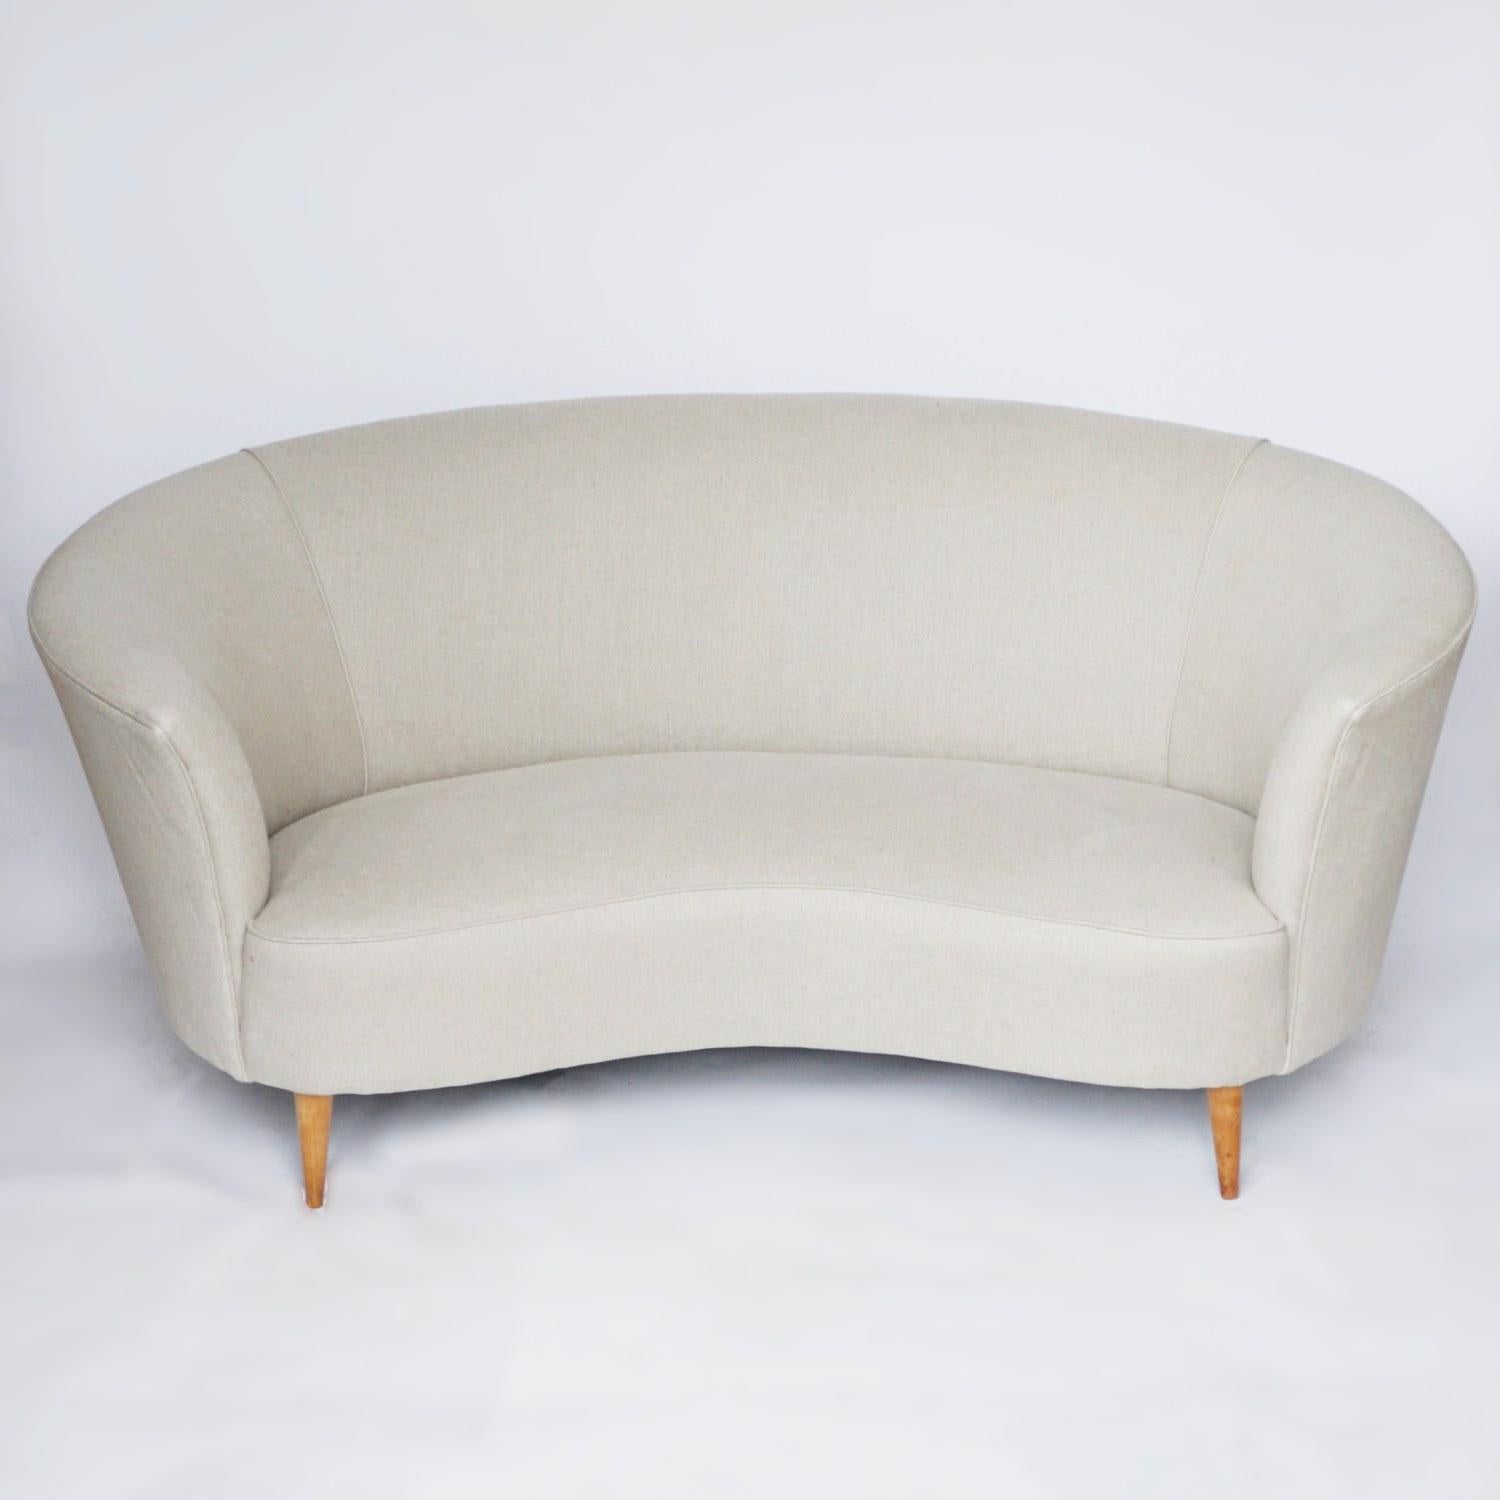 A midcentury sofa attributed to Gio Ponti. Curved frame allowing a comfortable seating position. Re-upholstered in natural linen. Solid beech feet. 

Dimensions: H 73cm, W 160cm, D 70cm, seat H 34cm, W 105cm, D 50cm 

Origin: Italian

Date: